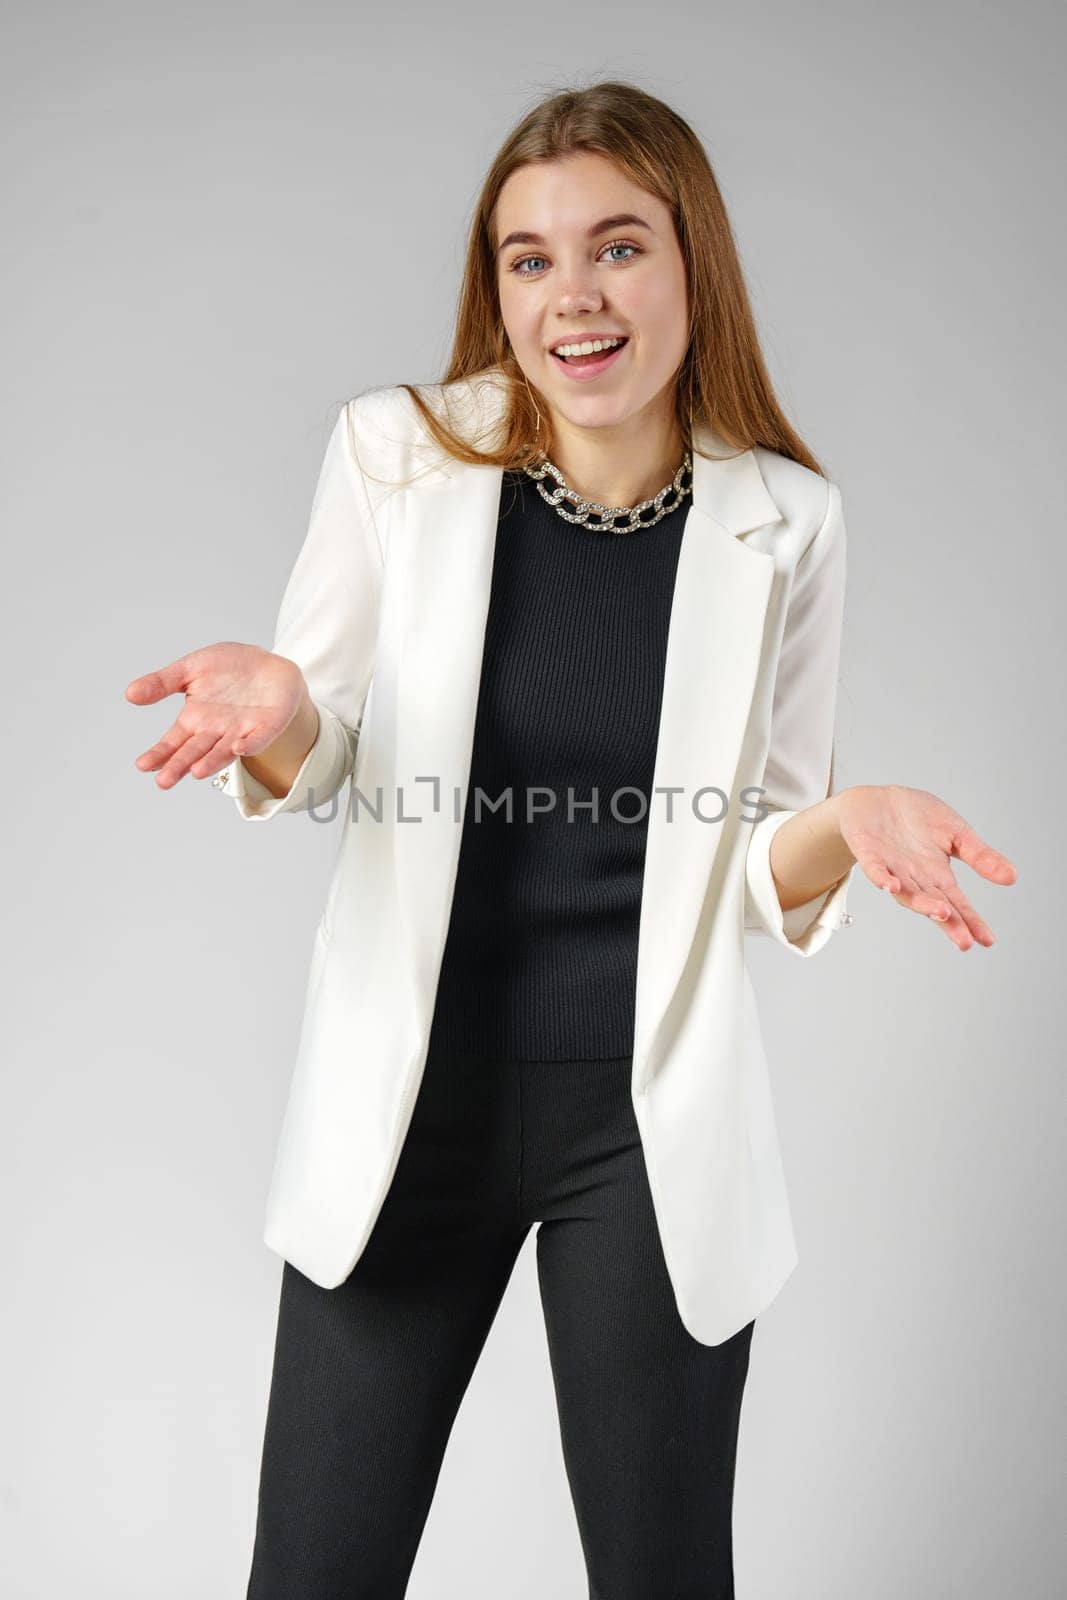 Young Woman Expressing Confusion With Hands Raised Against a Grey Background in studio